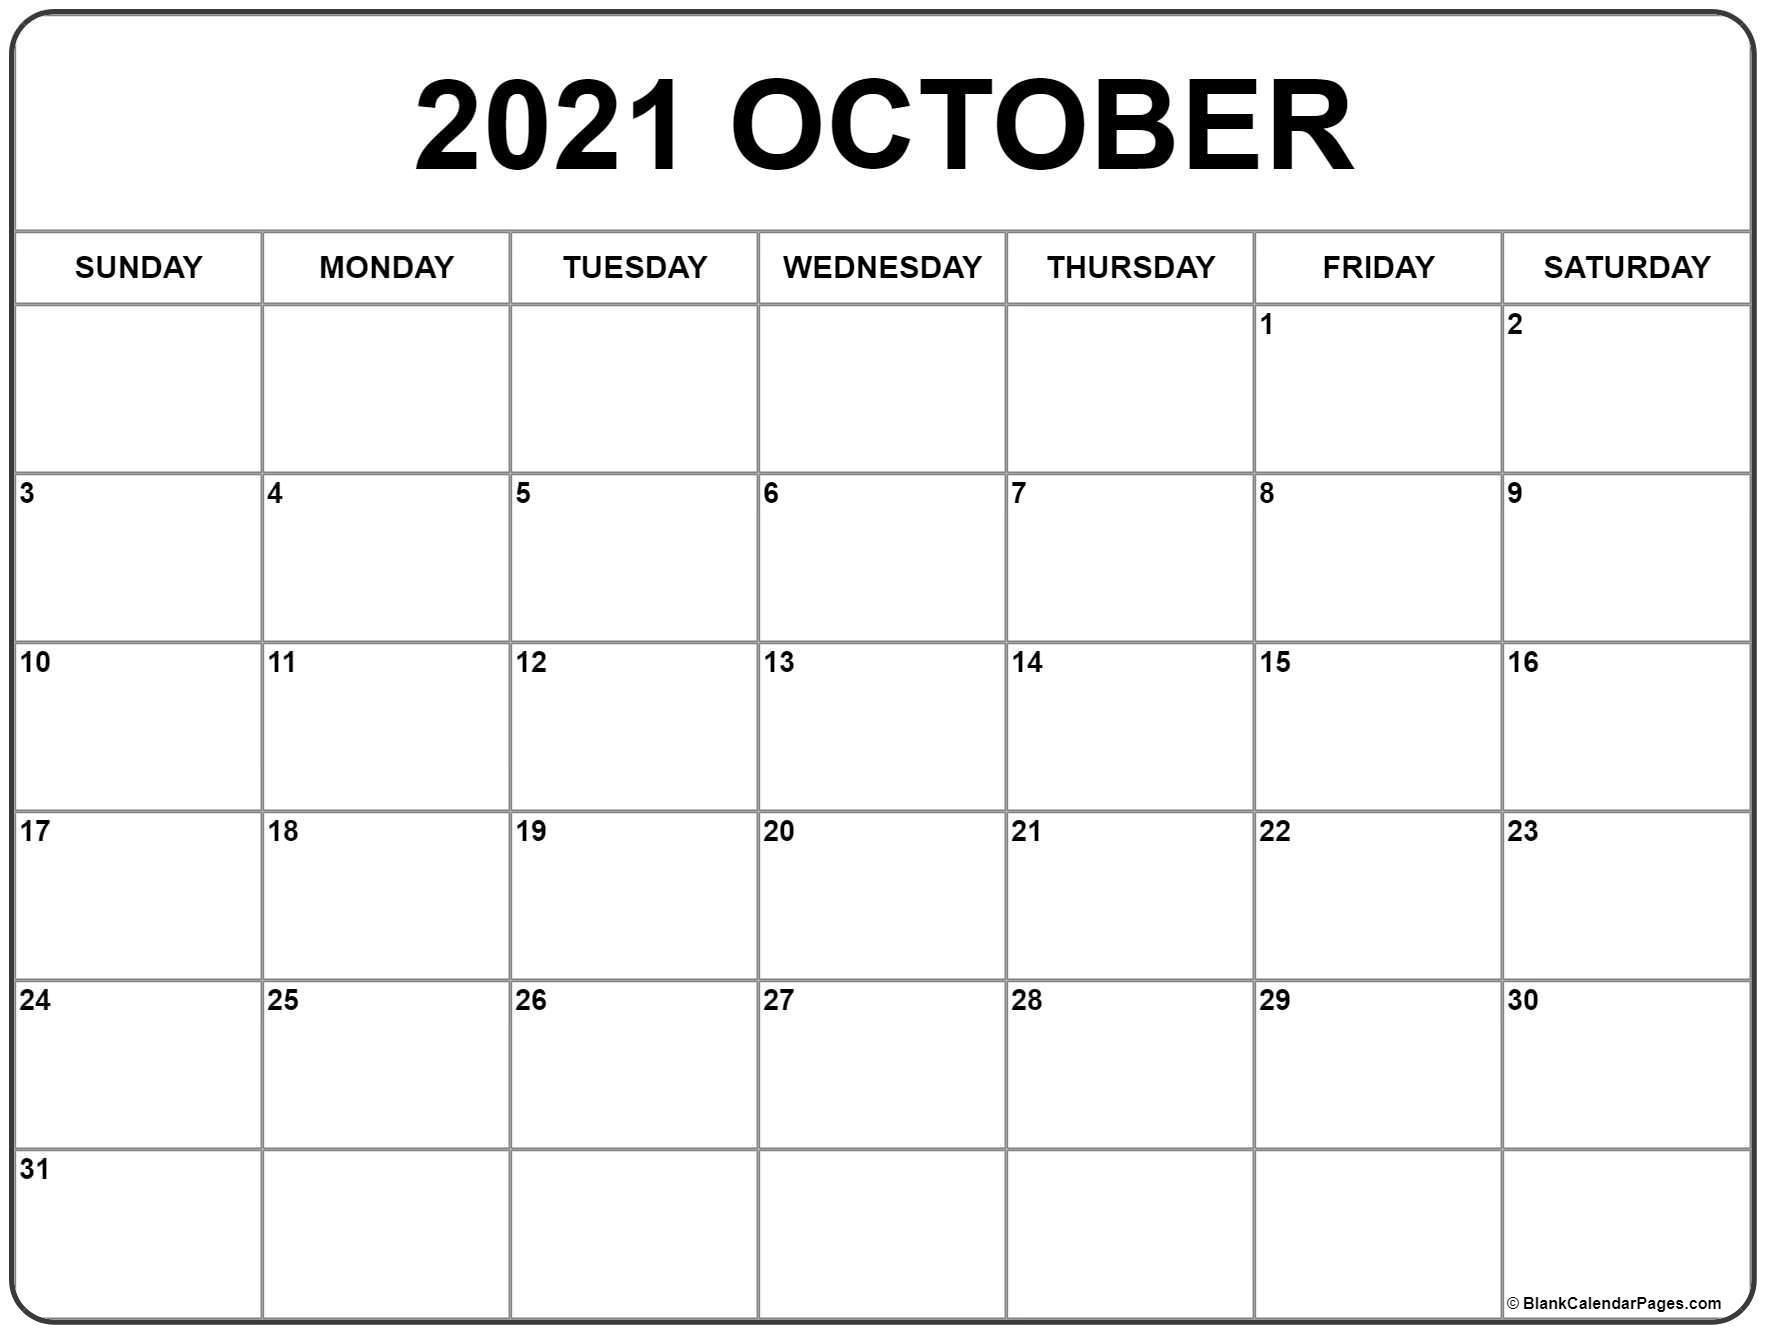 Collect August Through October 2021 Calenday